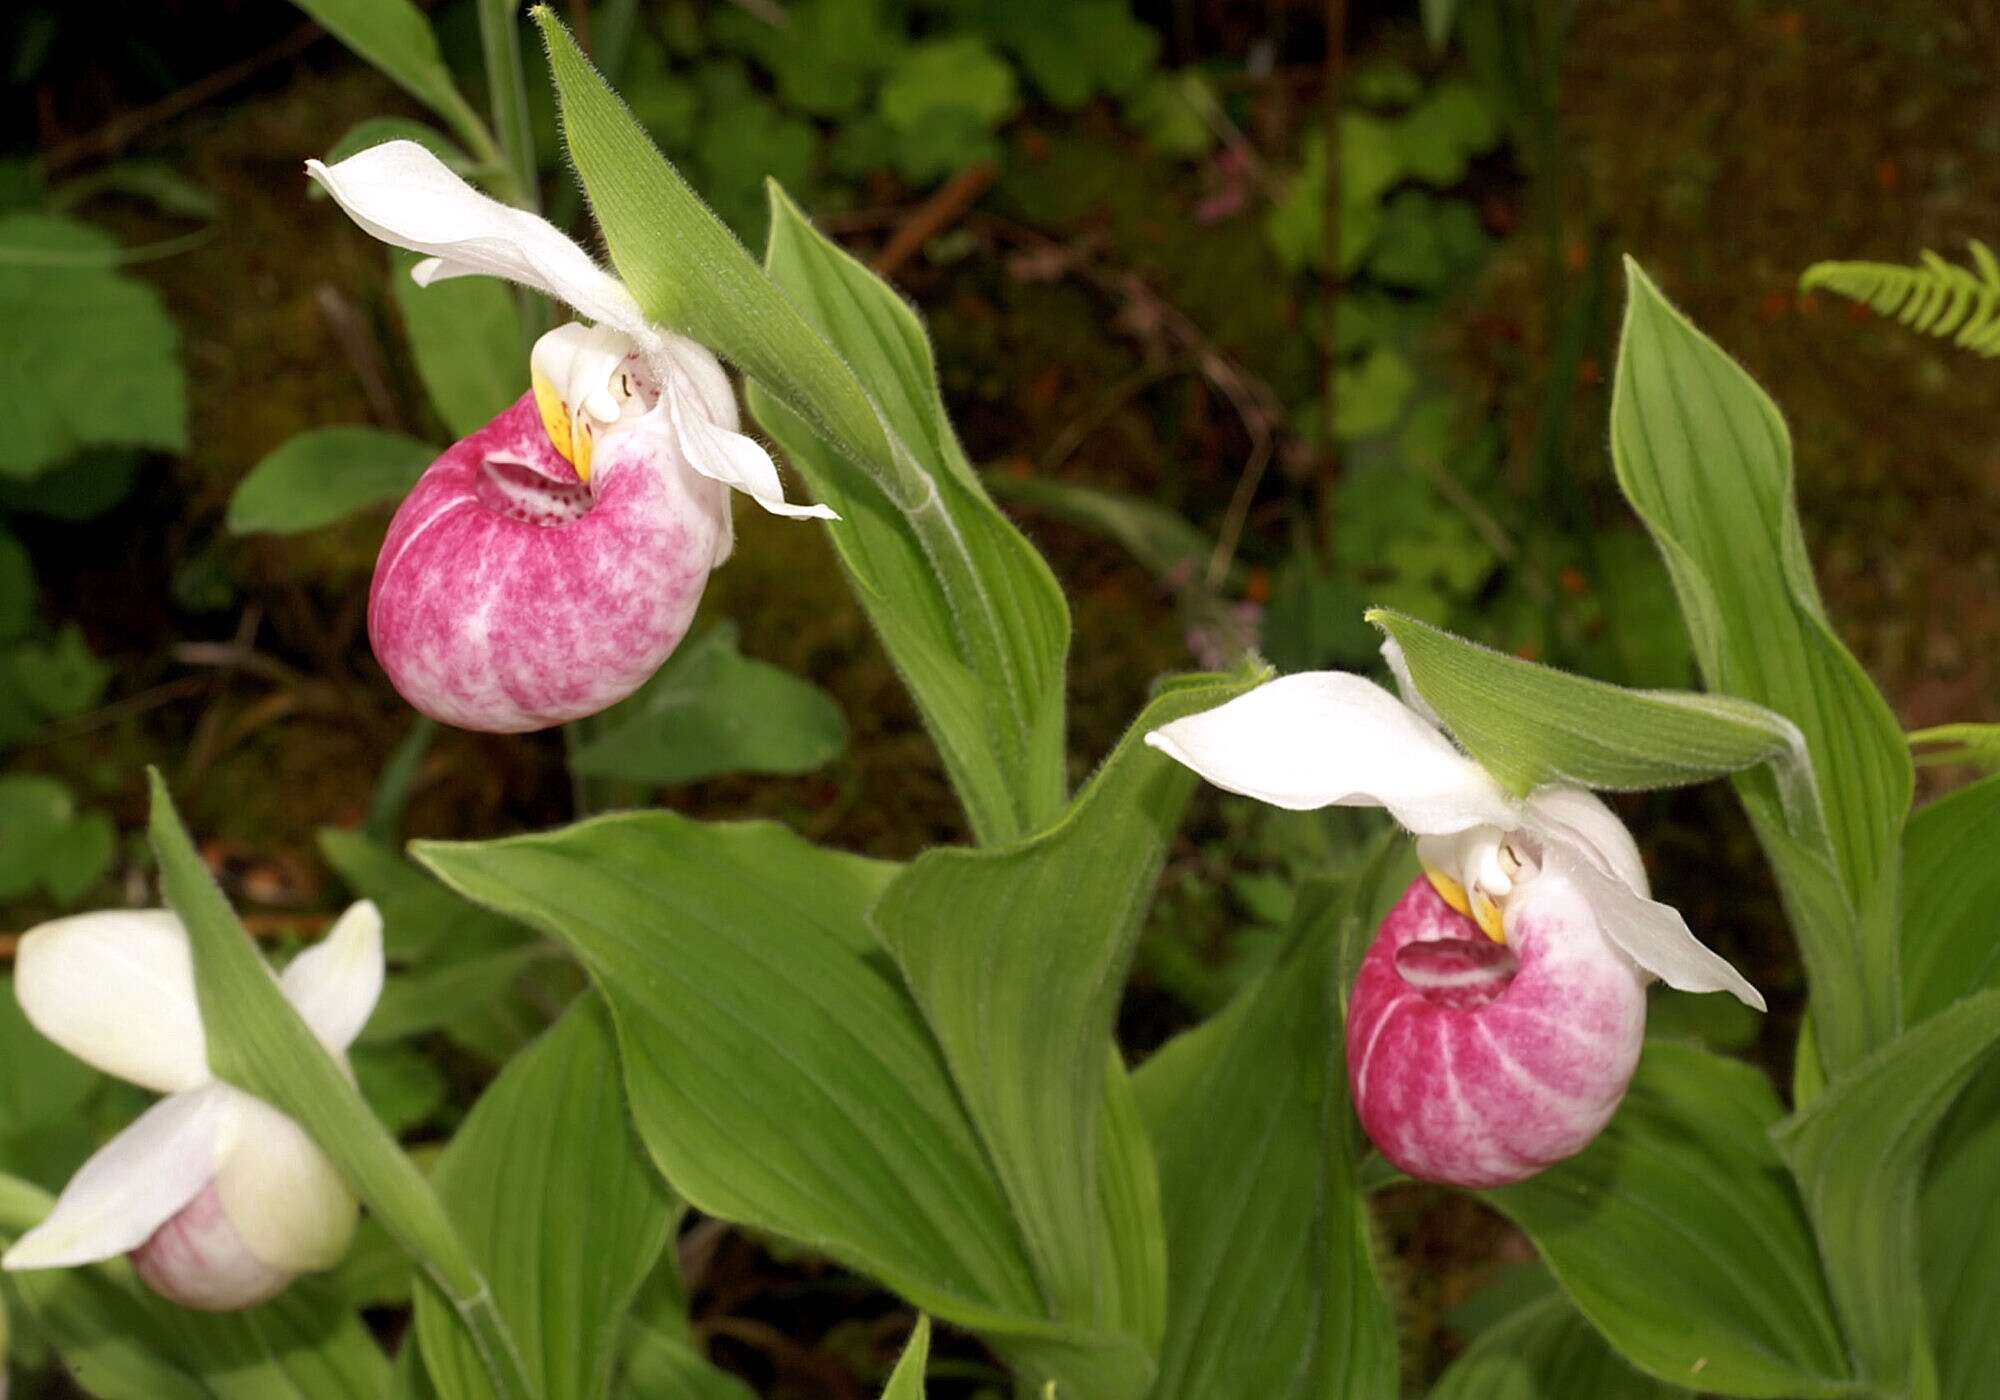 Image of Showy lady's slipper